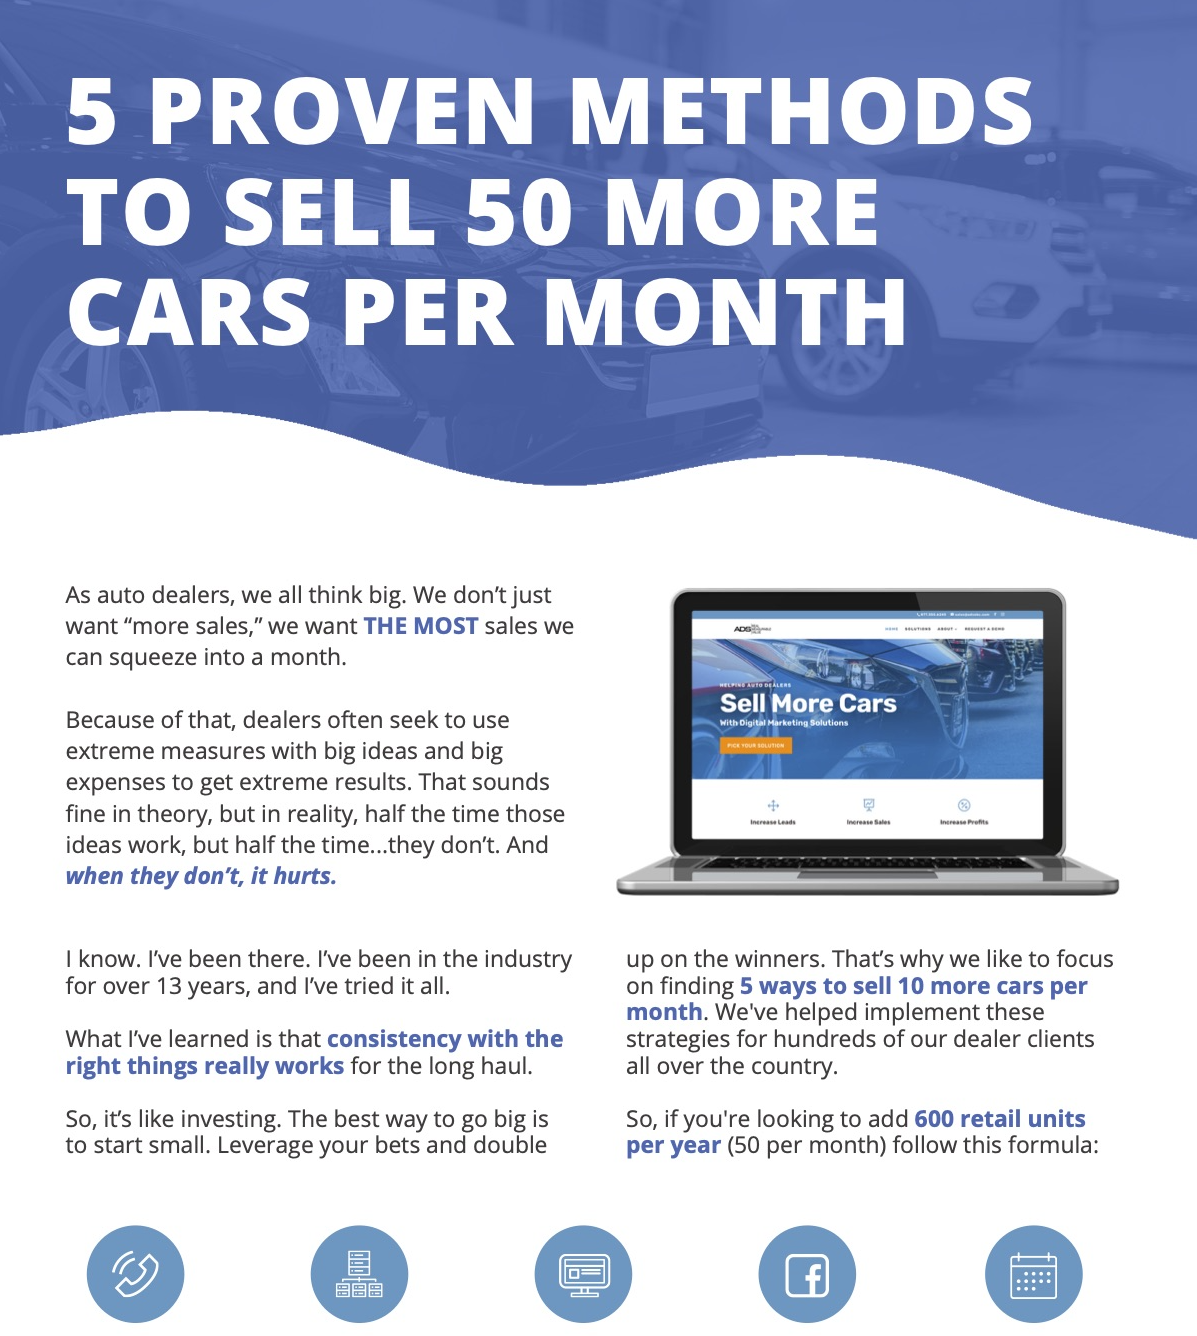 5 Proven Methods to Sell 50 More Cars Per Month